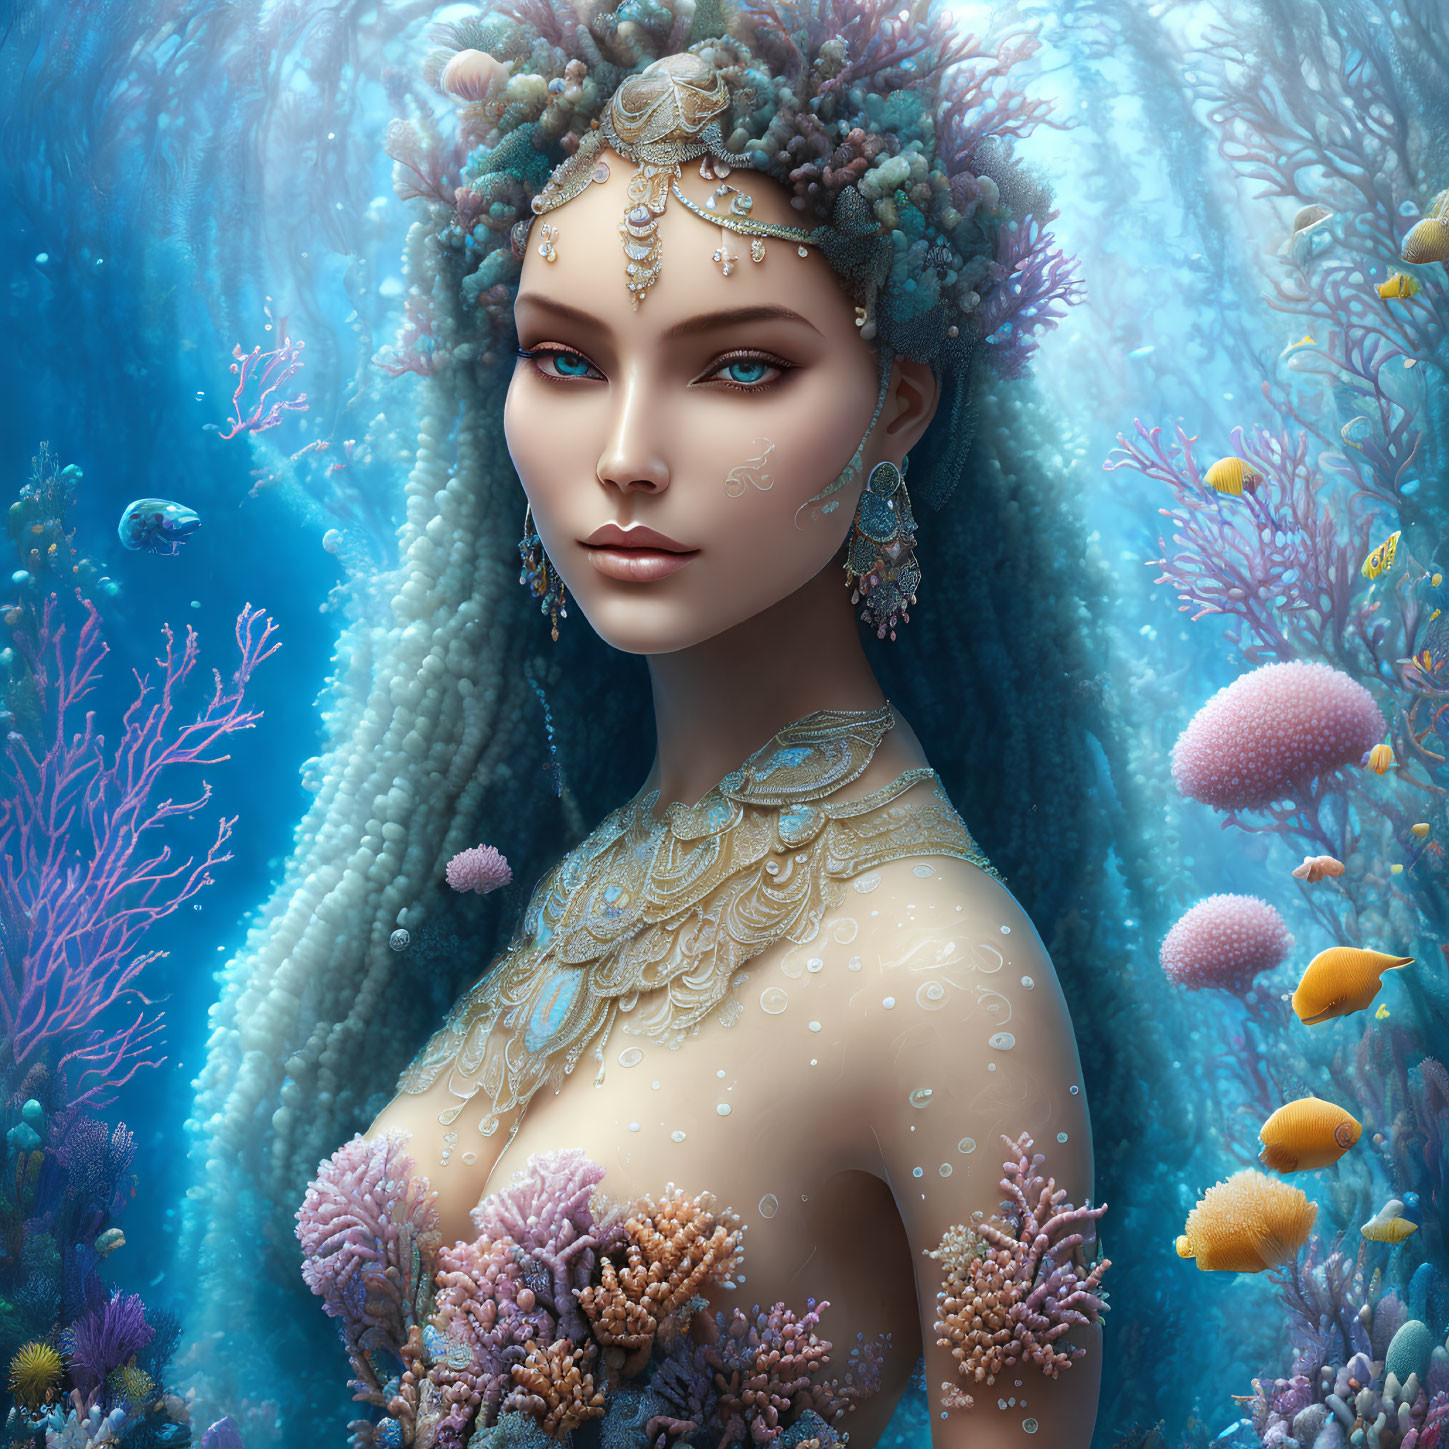 Ethereal underwater scene with elegant female figure and colorful coral & fish